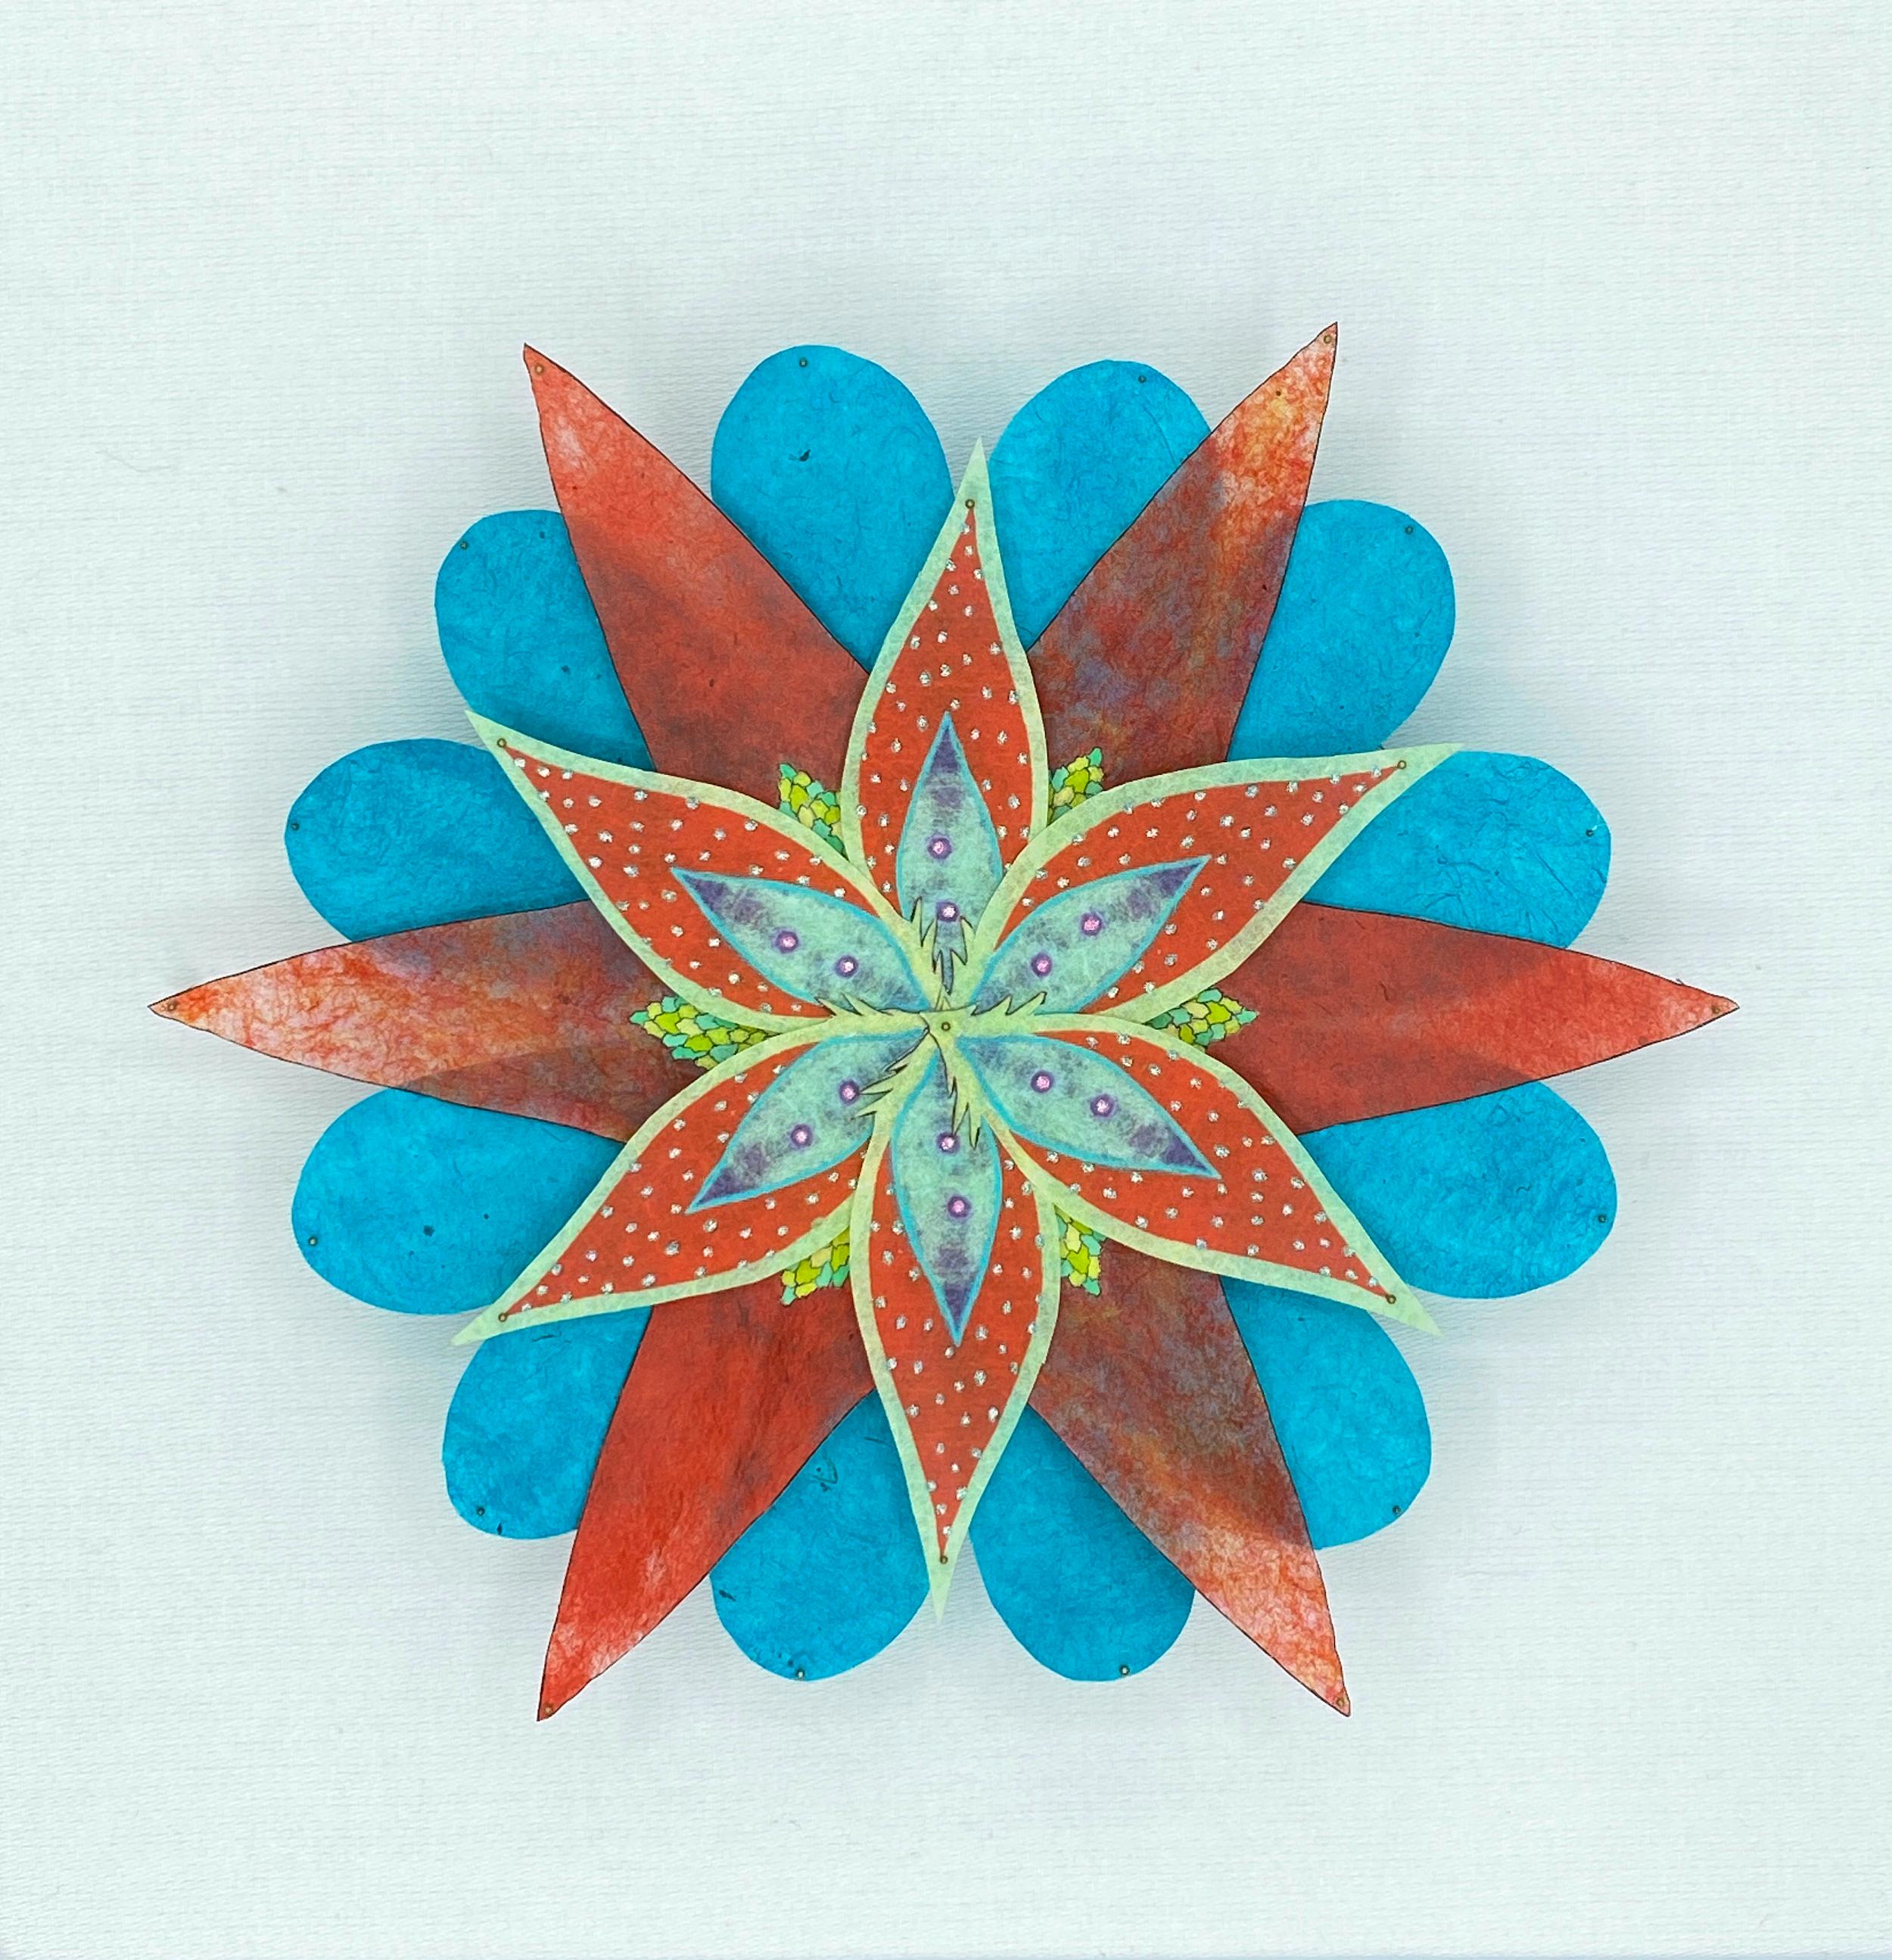 Fanfare Star, Colorful Botanical Paper Wall Sculpture in Bright Teal Blue, Red